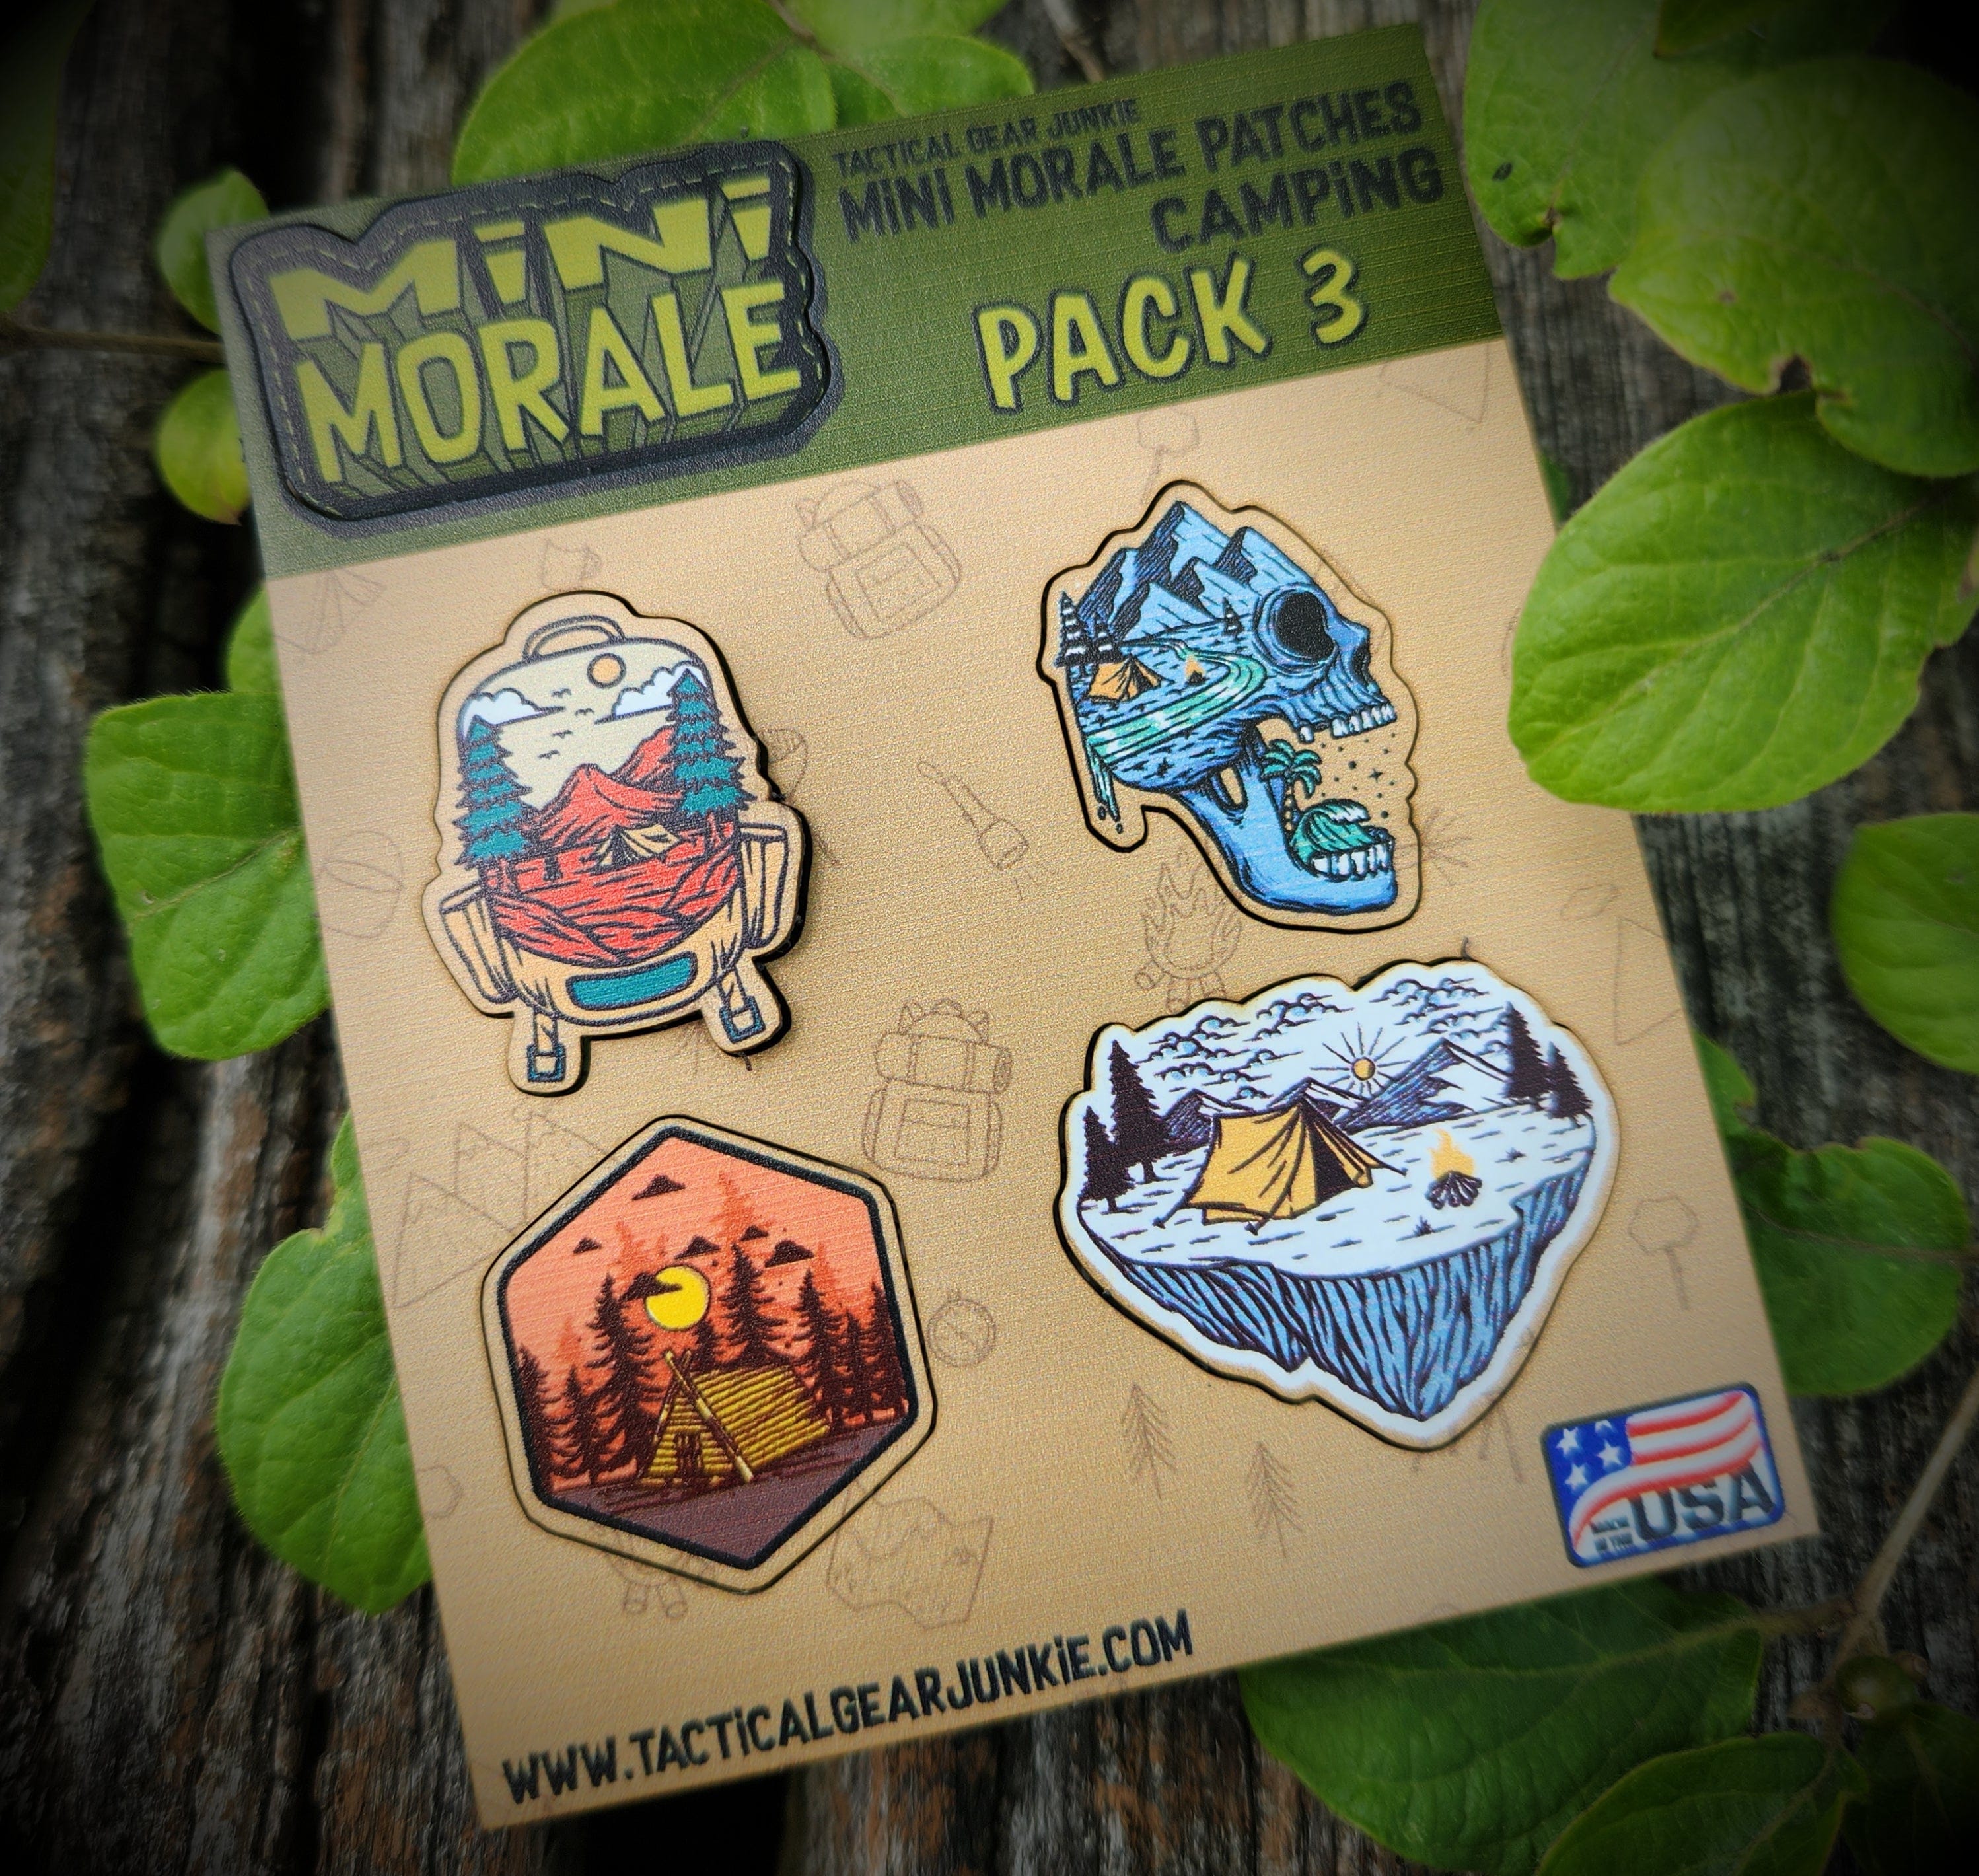 Tactical Gear Junkie Patches Mini Morale - Camping Pack 3